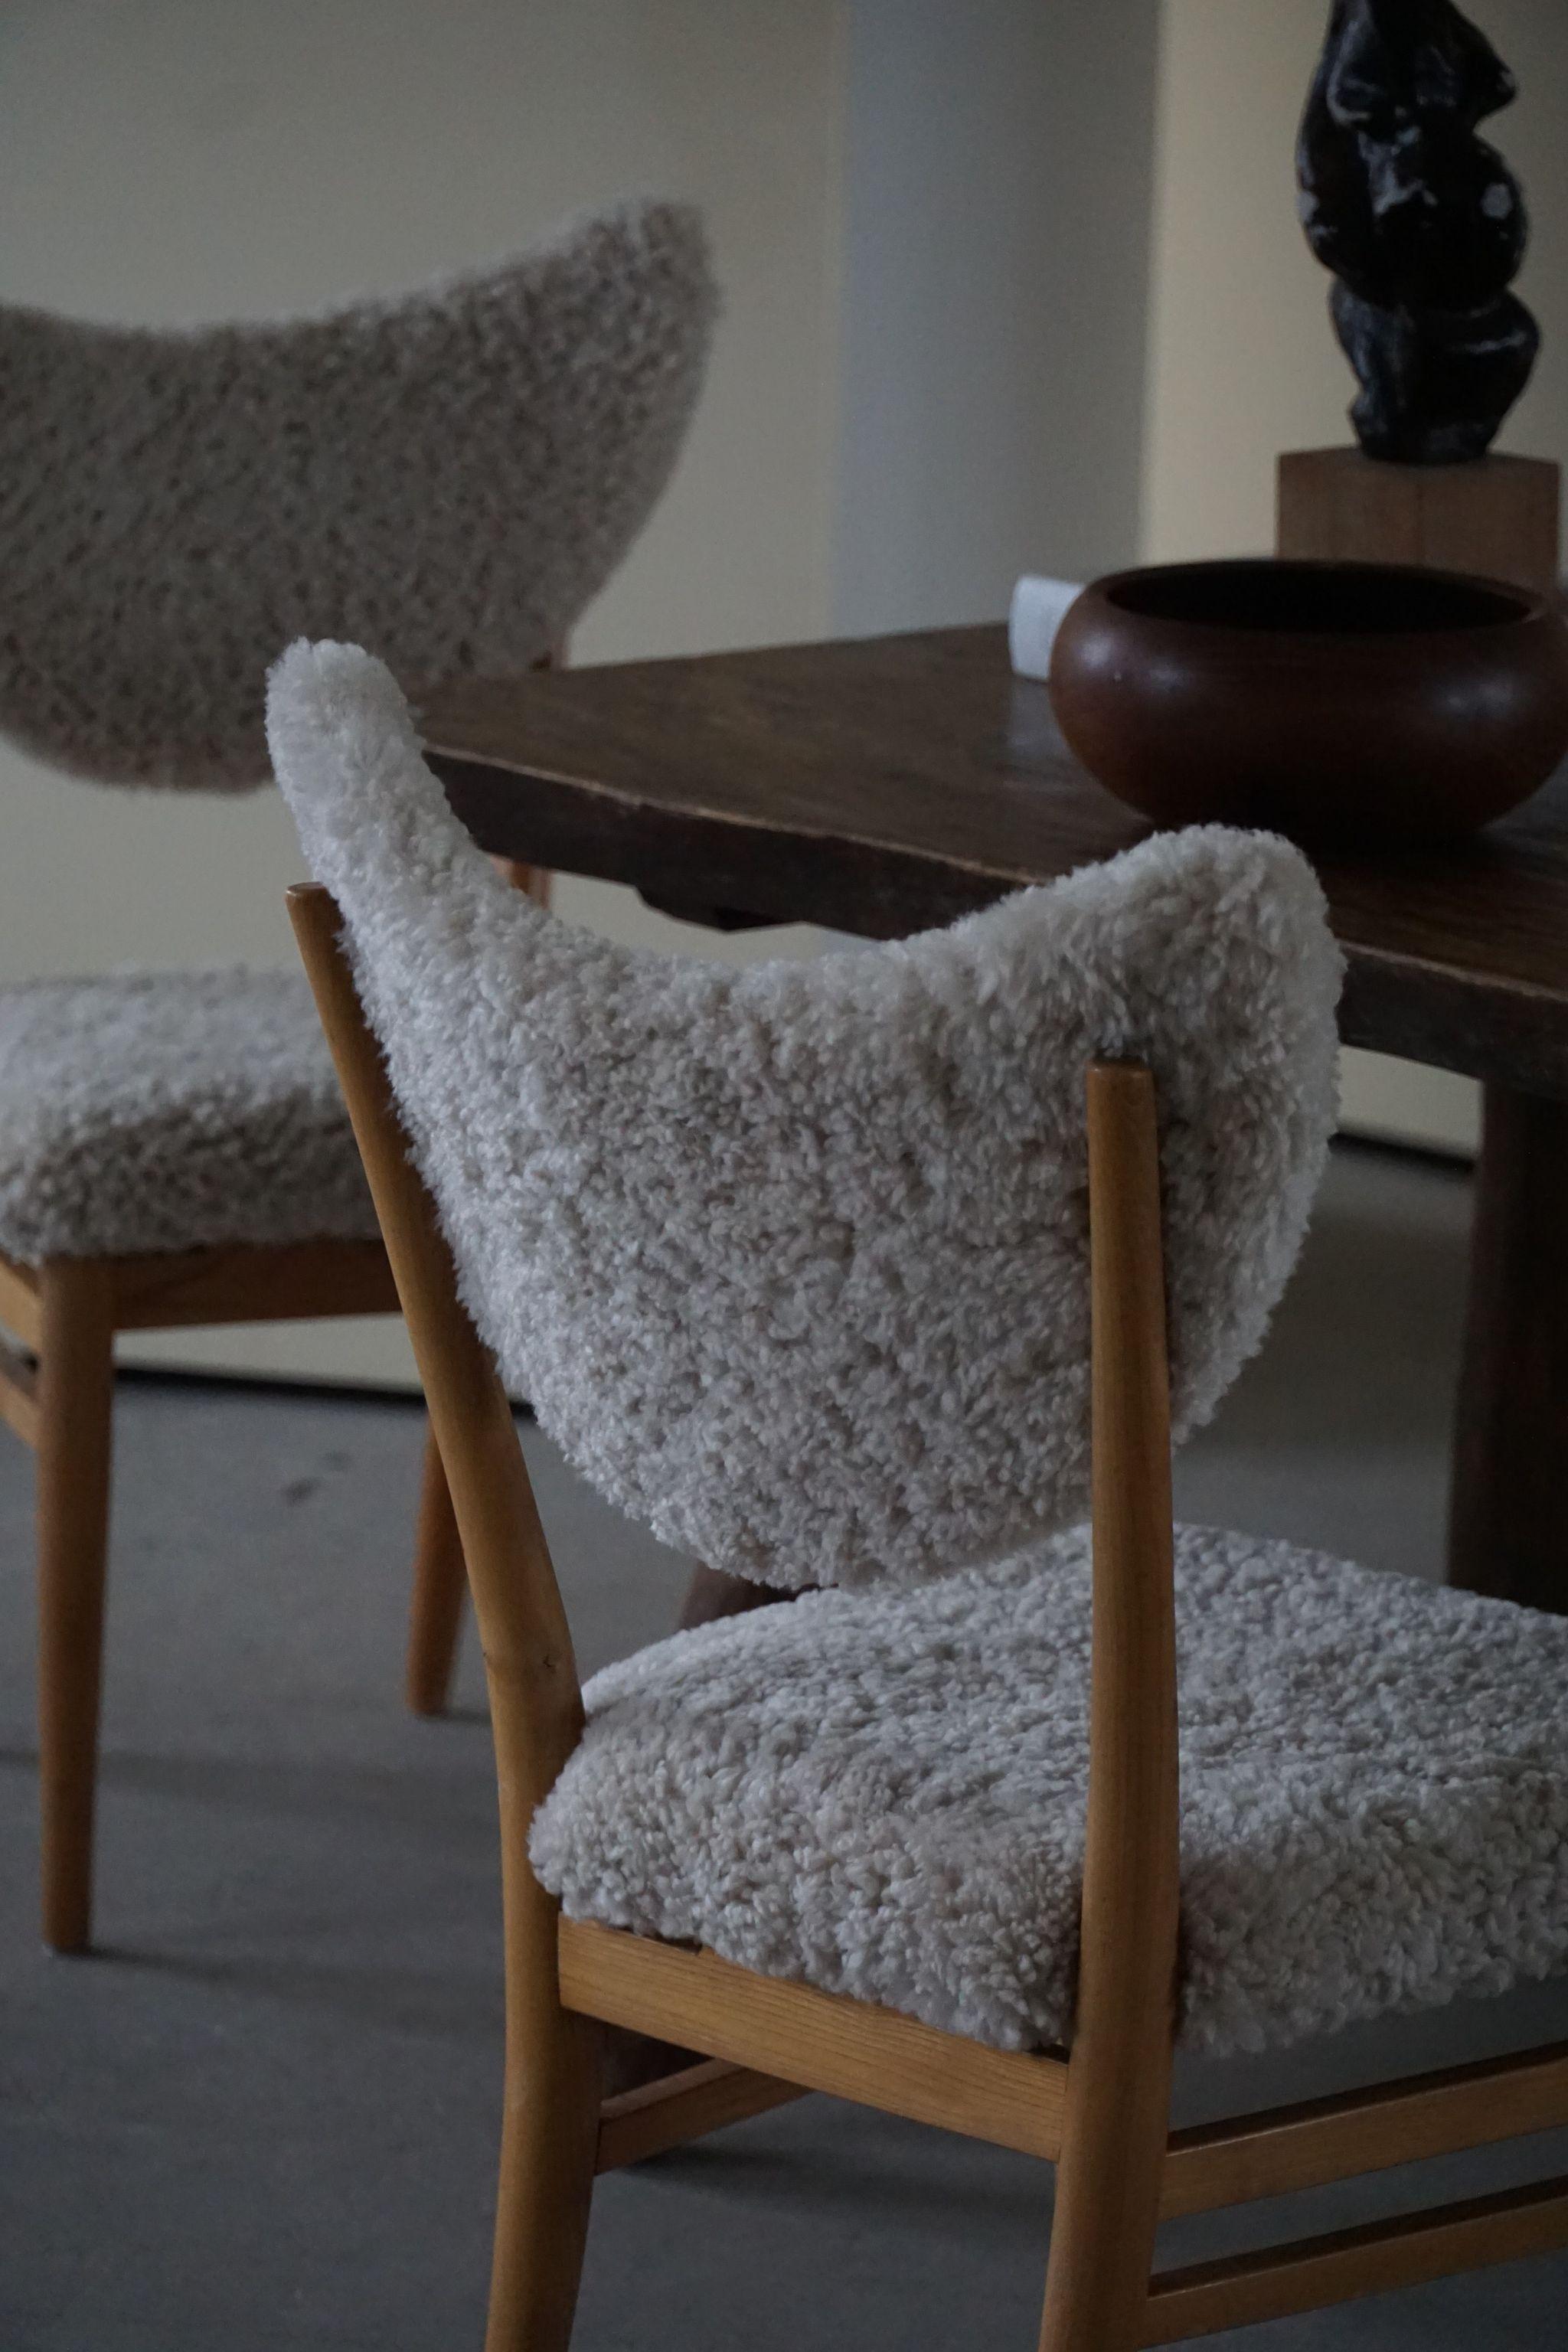 Hvidt & Mølgaard, Set of 4 Chairs in Ash, Reupholstered in Lambswool, 1950s For Sale 3